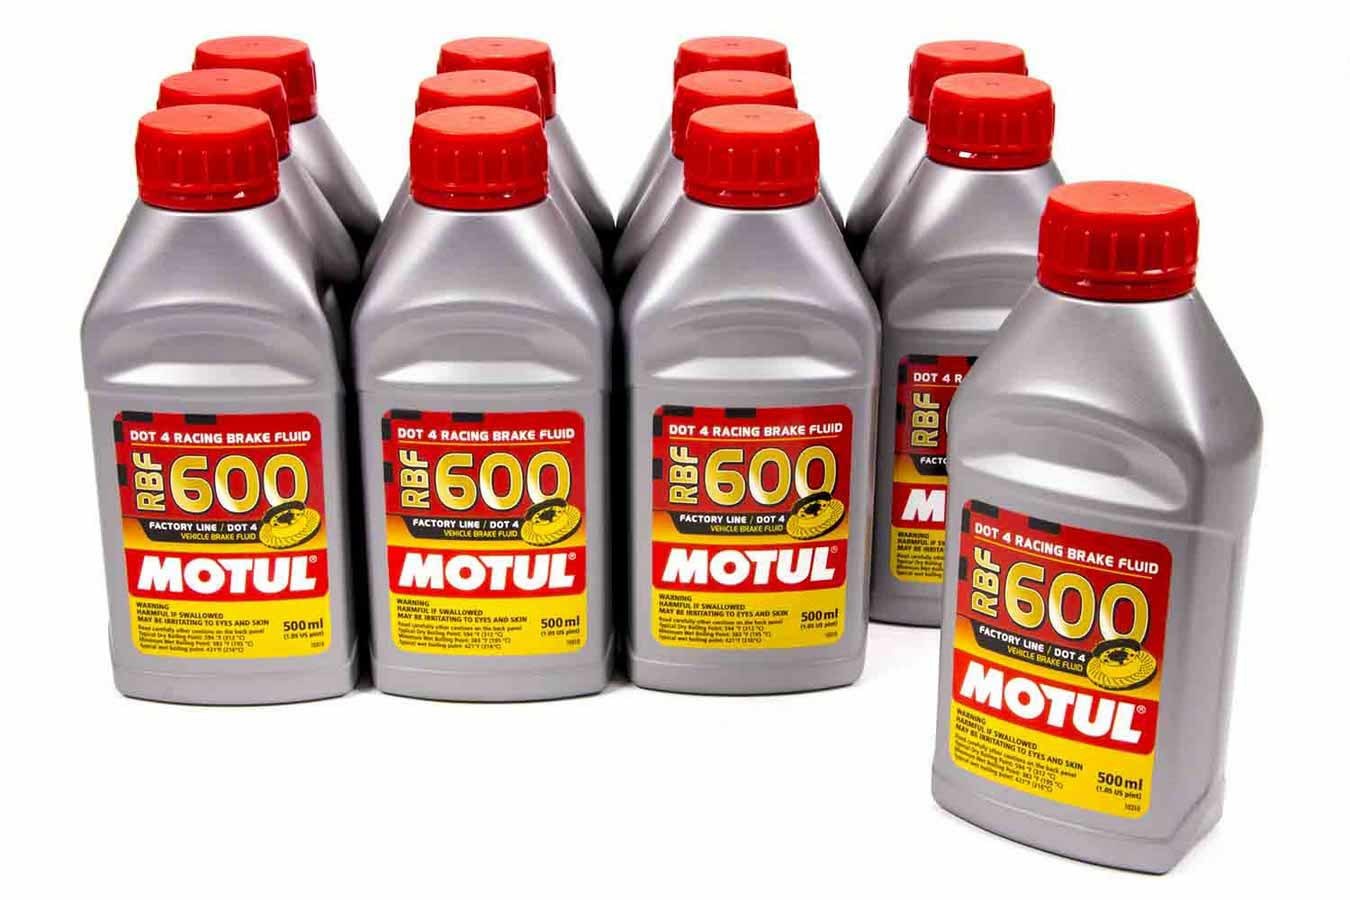 Motul RBF 600 Racing Brake Fluid Corvette and Others, Factory Line, DOT 4, Synthetic, 500 ml, Set of 12